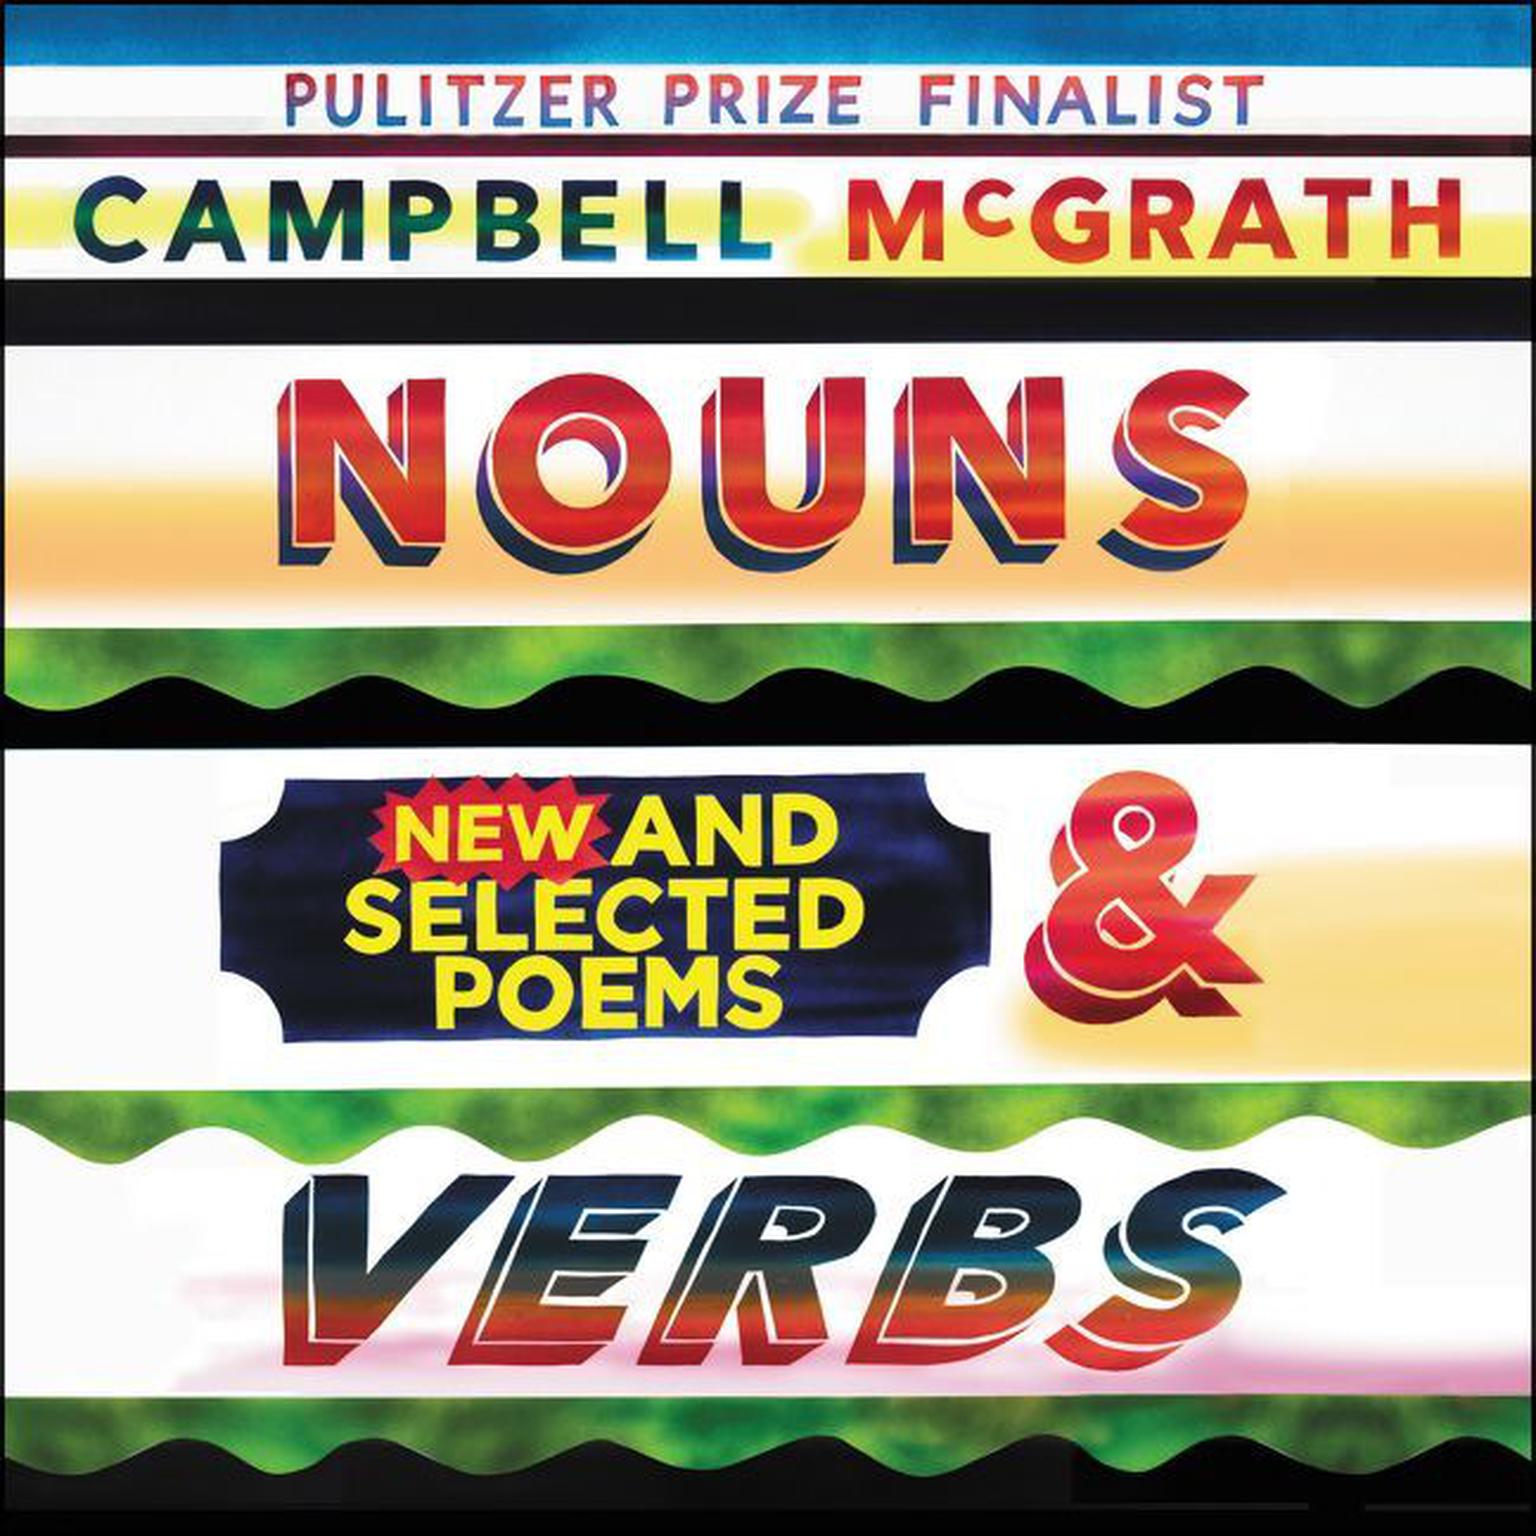 Nouns & Verbs: New and Selected Poems Audiobook, by Campbell McGrath